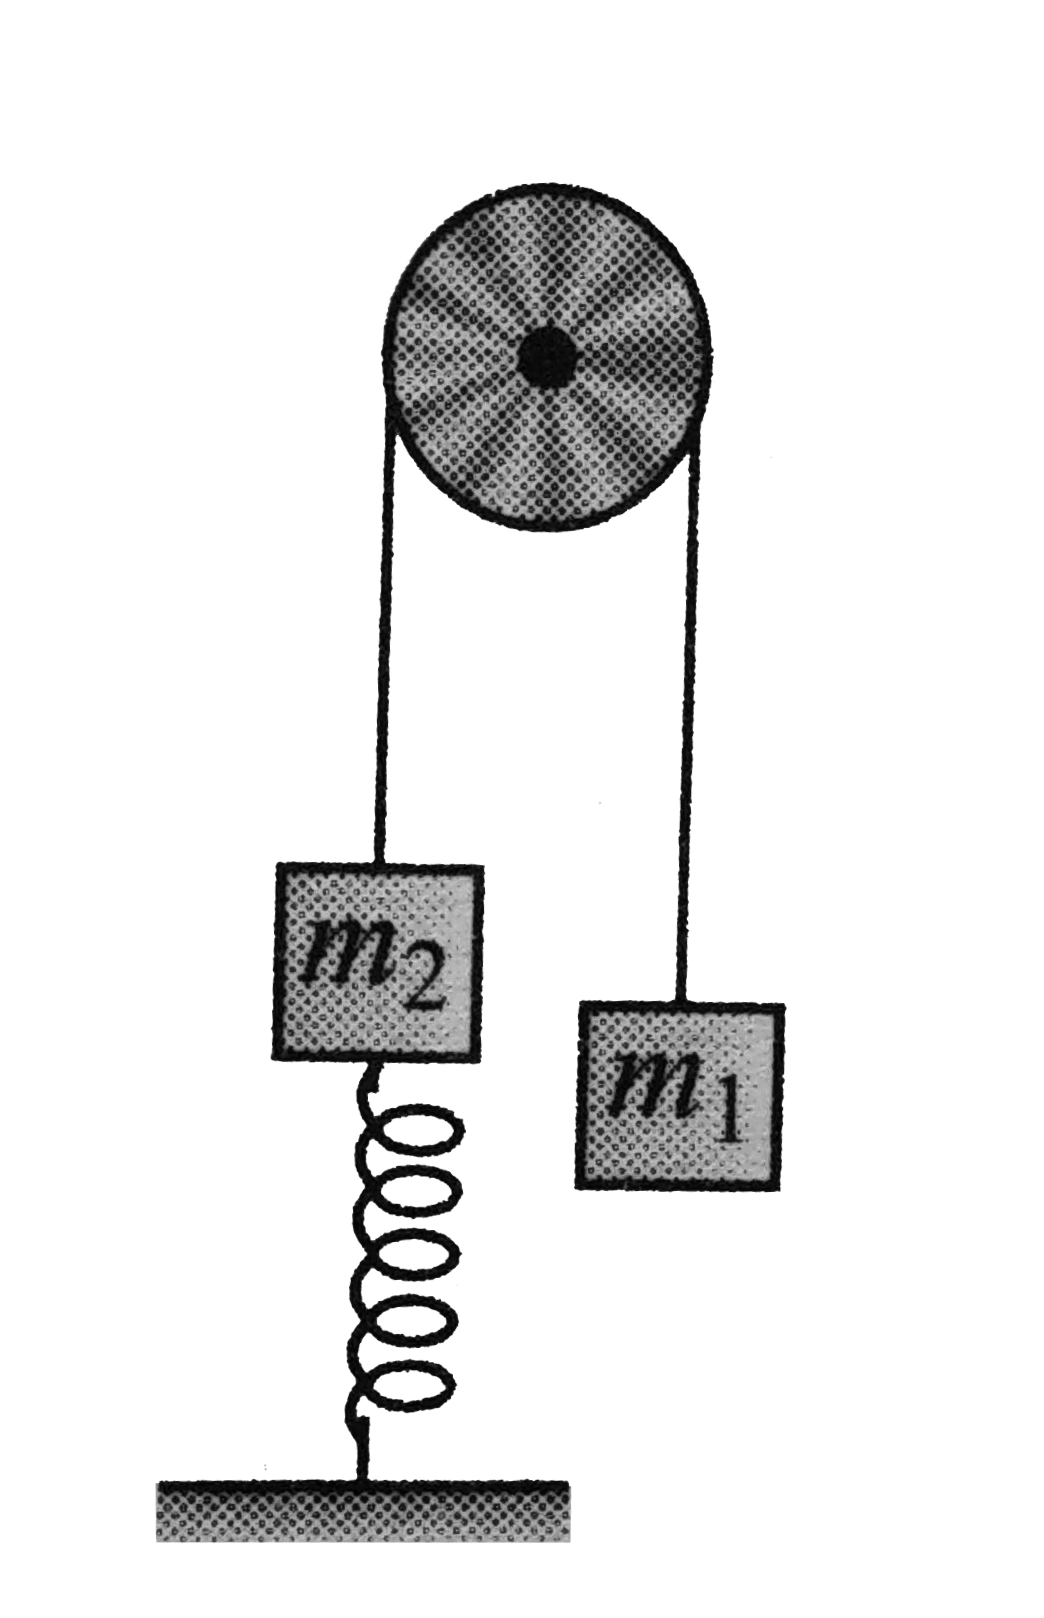 In an ideal pulley particle system, mass m2 is connected with a vertical spring of stiffness k. If mass m2 is released from rest, when the spring is underformed, find the maximum compression of the spring.